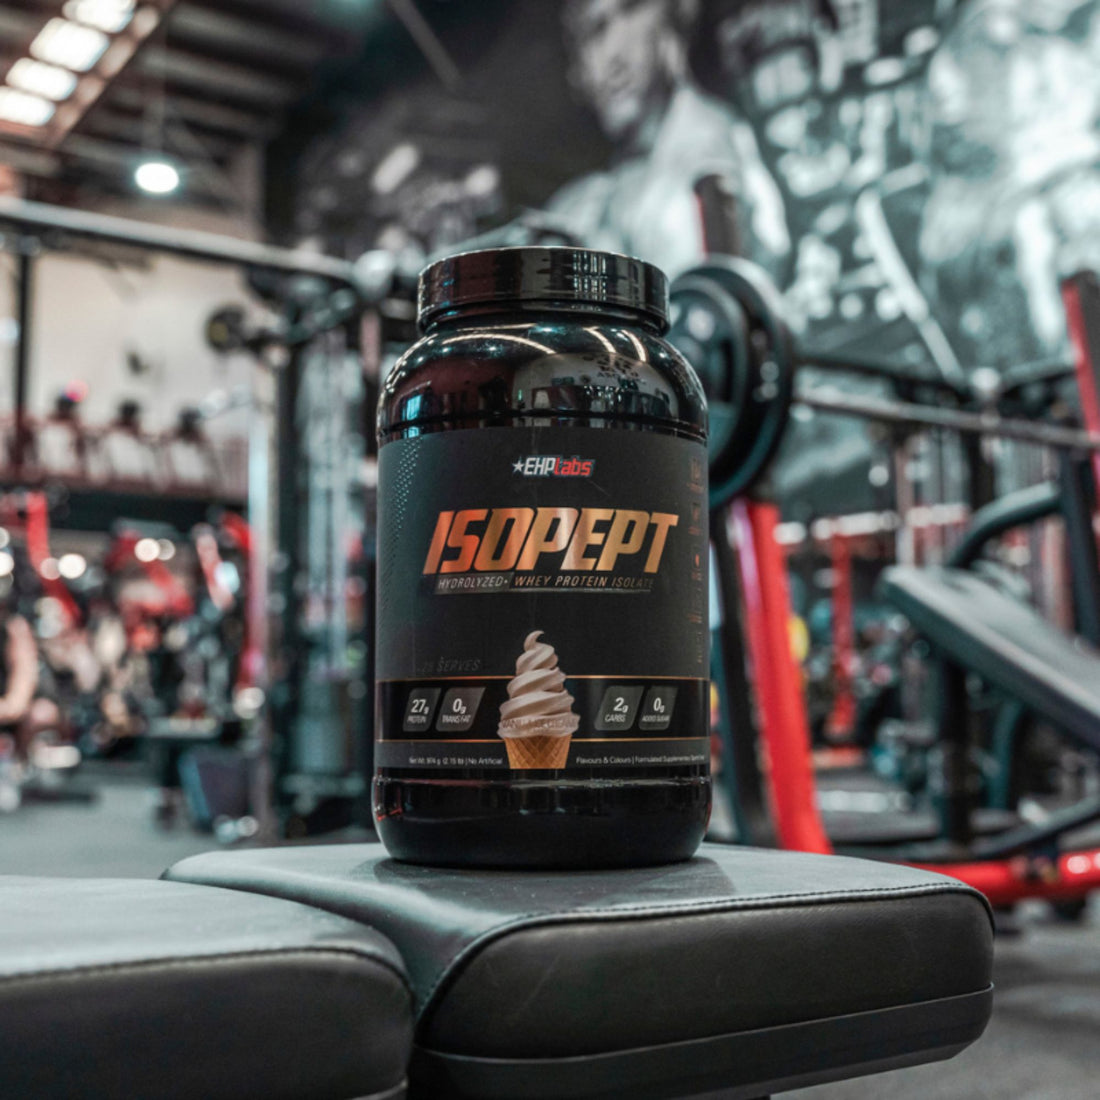 EHP Labs Isopept Protein Powder Whey Protein Isolate